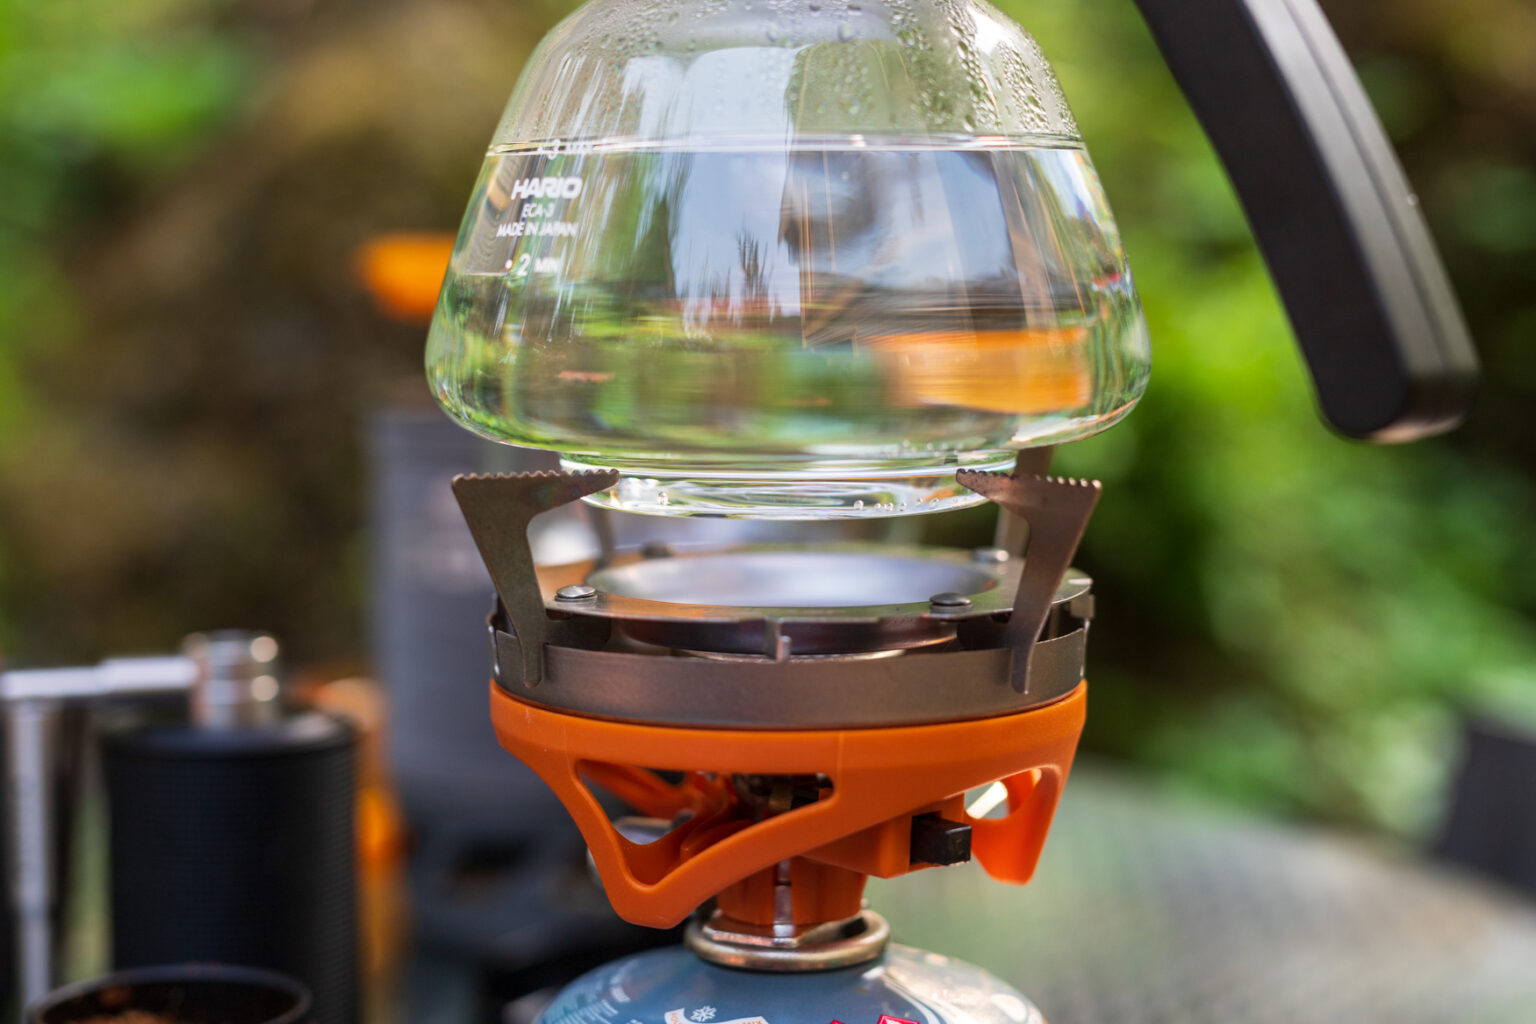 The Hario Electric Coffee Siphon seems almost perfectly designed for the Jetboil - it fits very tightly on the rotating pot vanes.